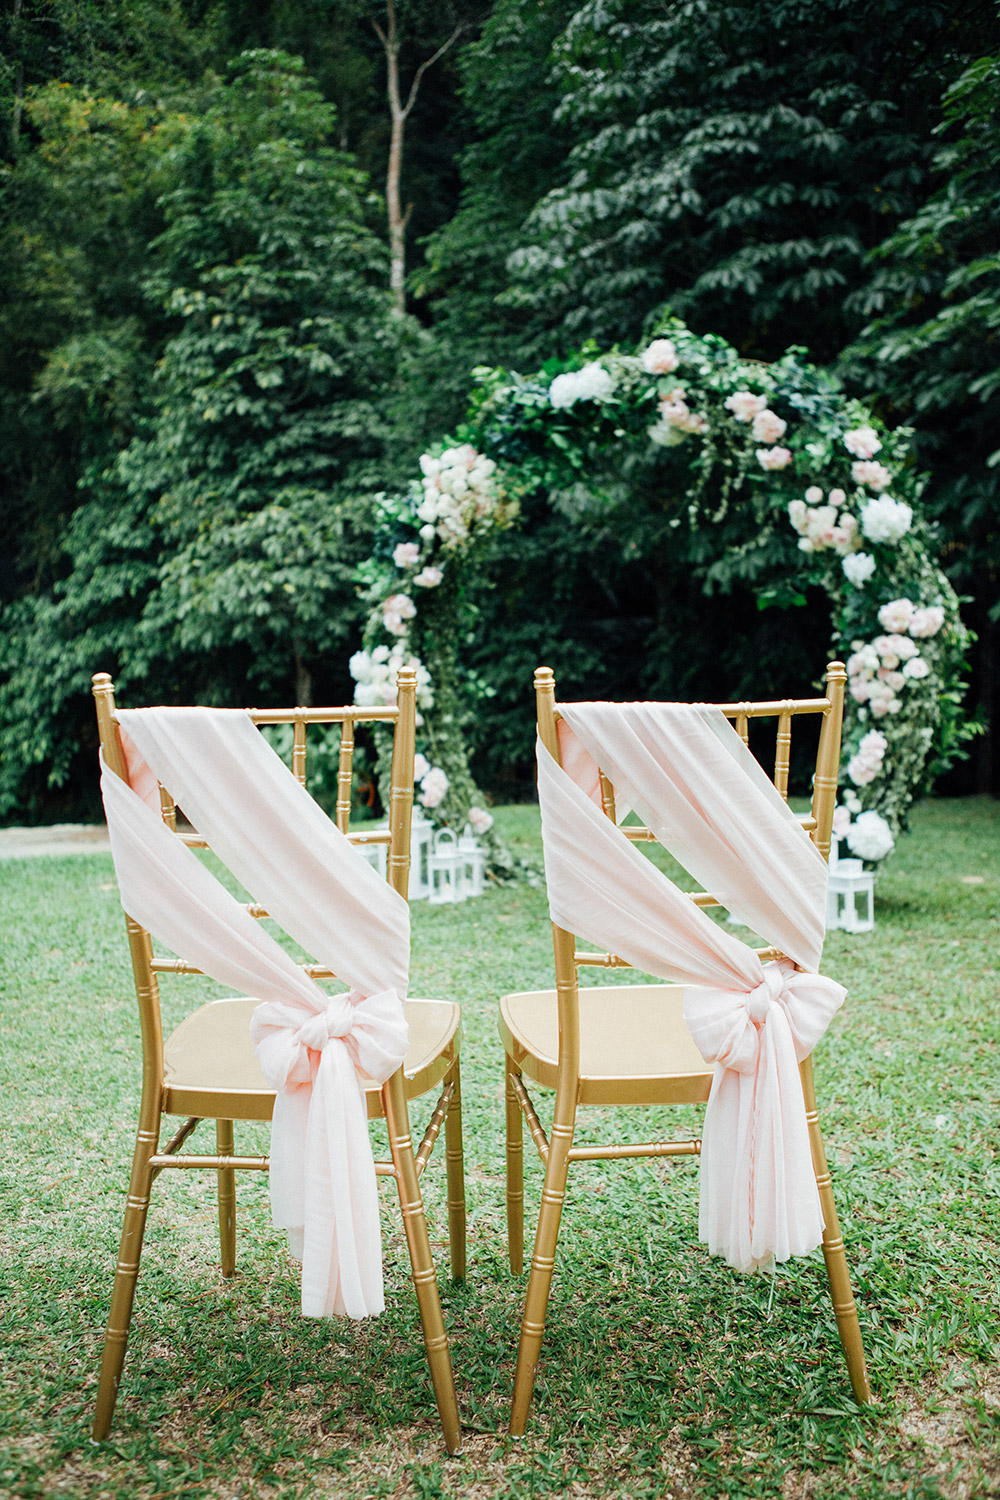 Wedding chairs. Photo by Fixer Photography. www.theweddingnotebook.com